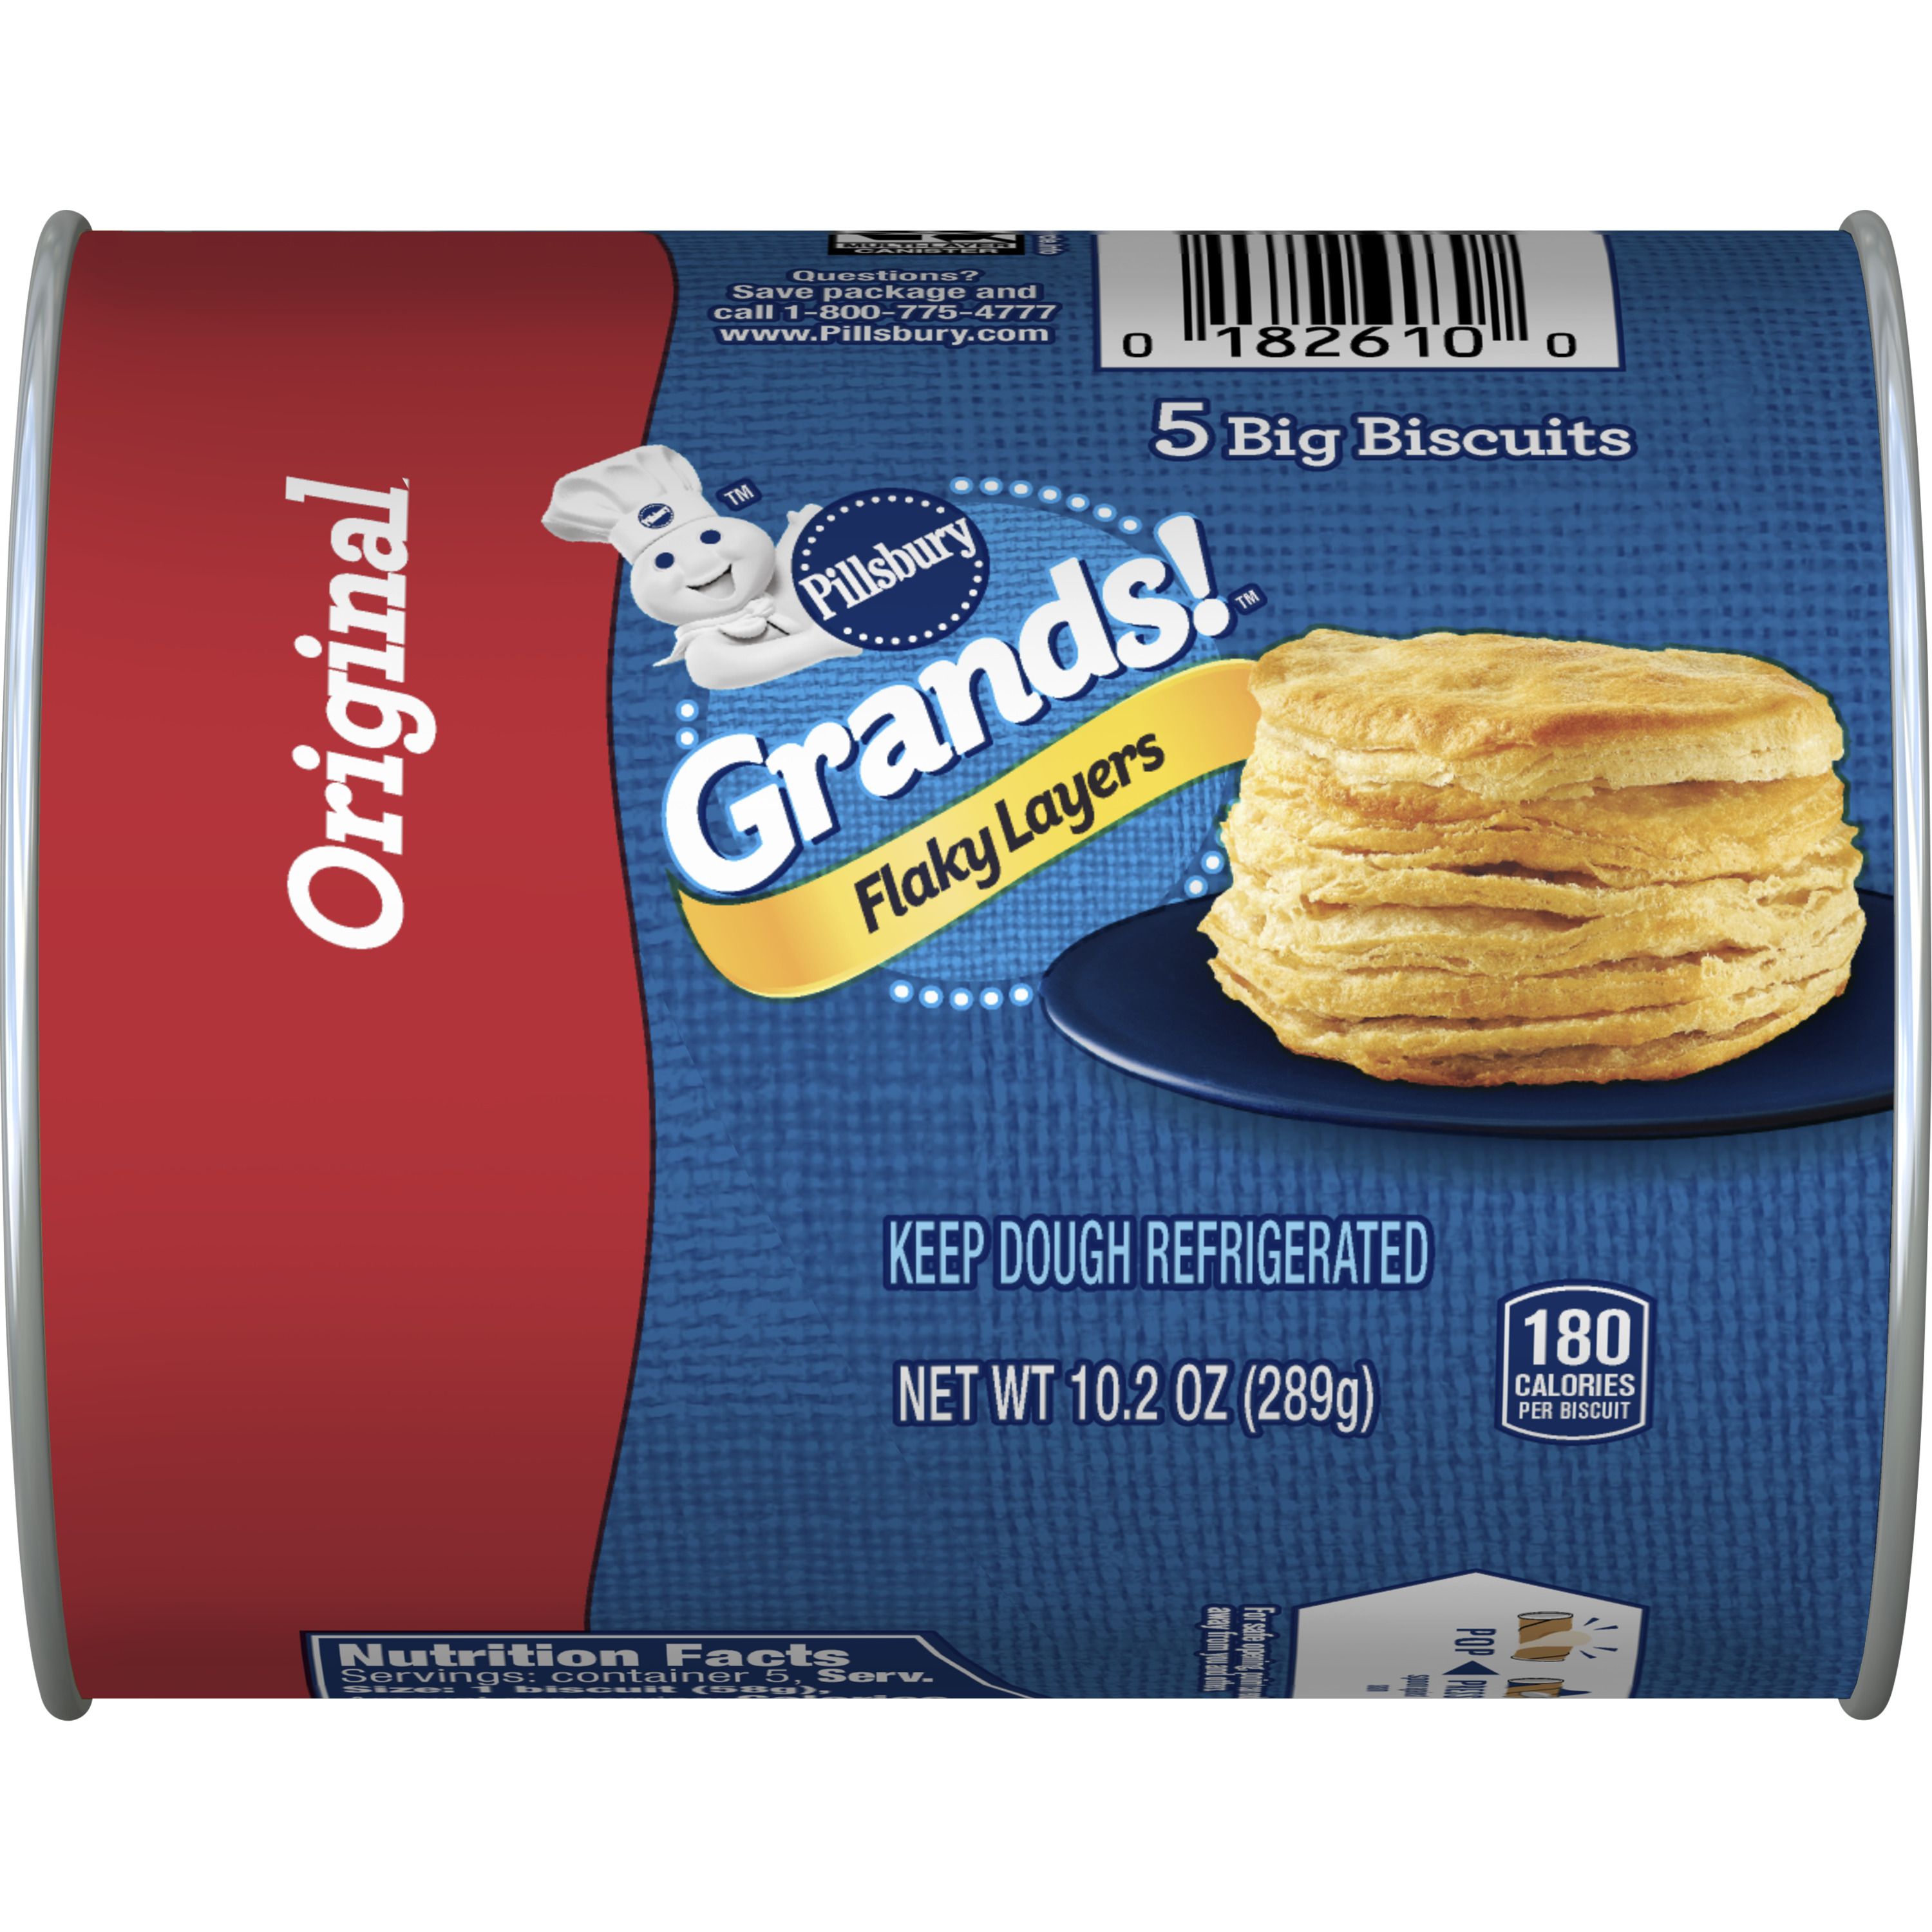 Grands!™ Flaky Layers Original Biscuits 5 ct - Front